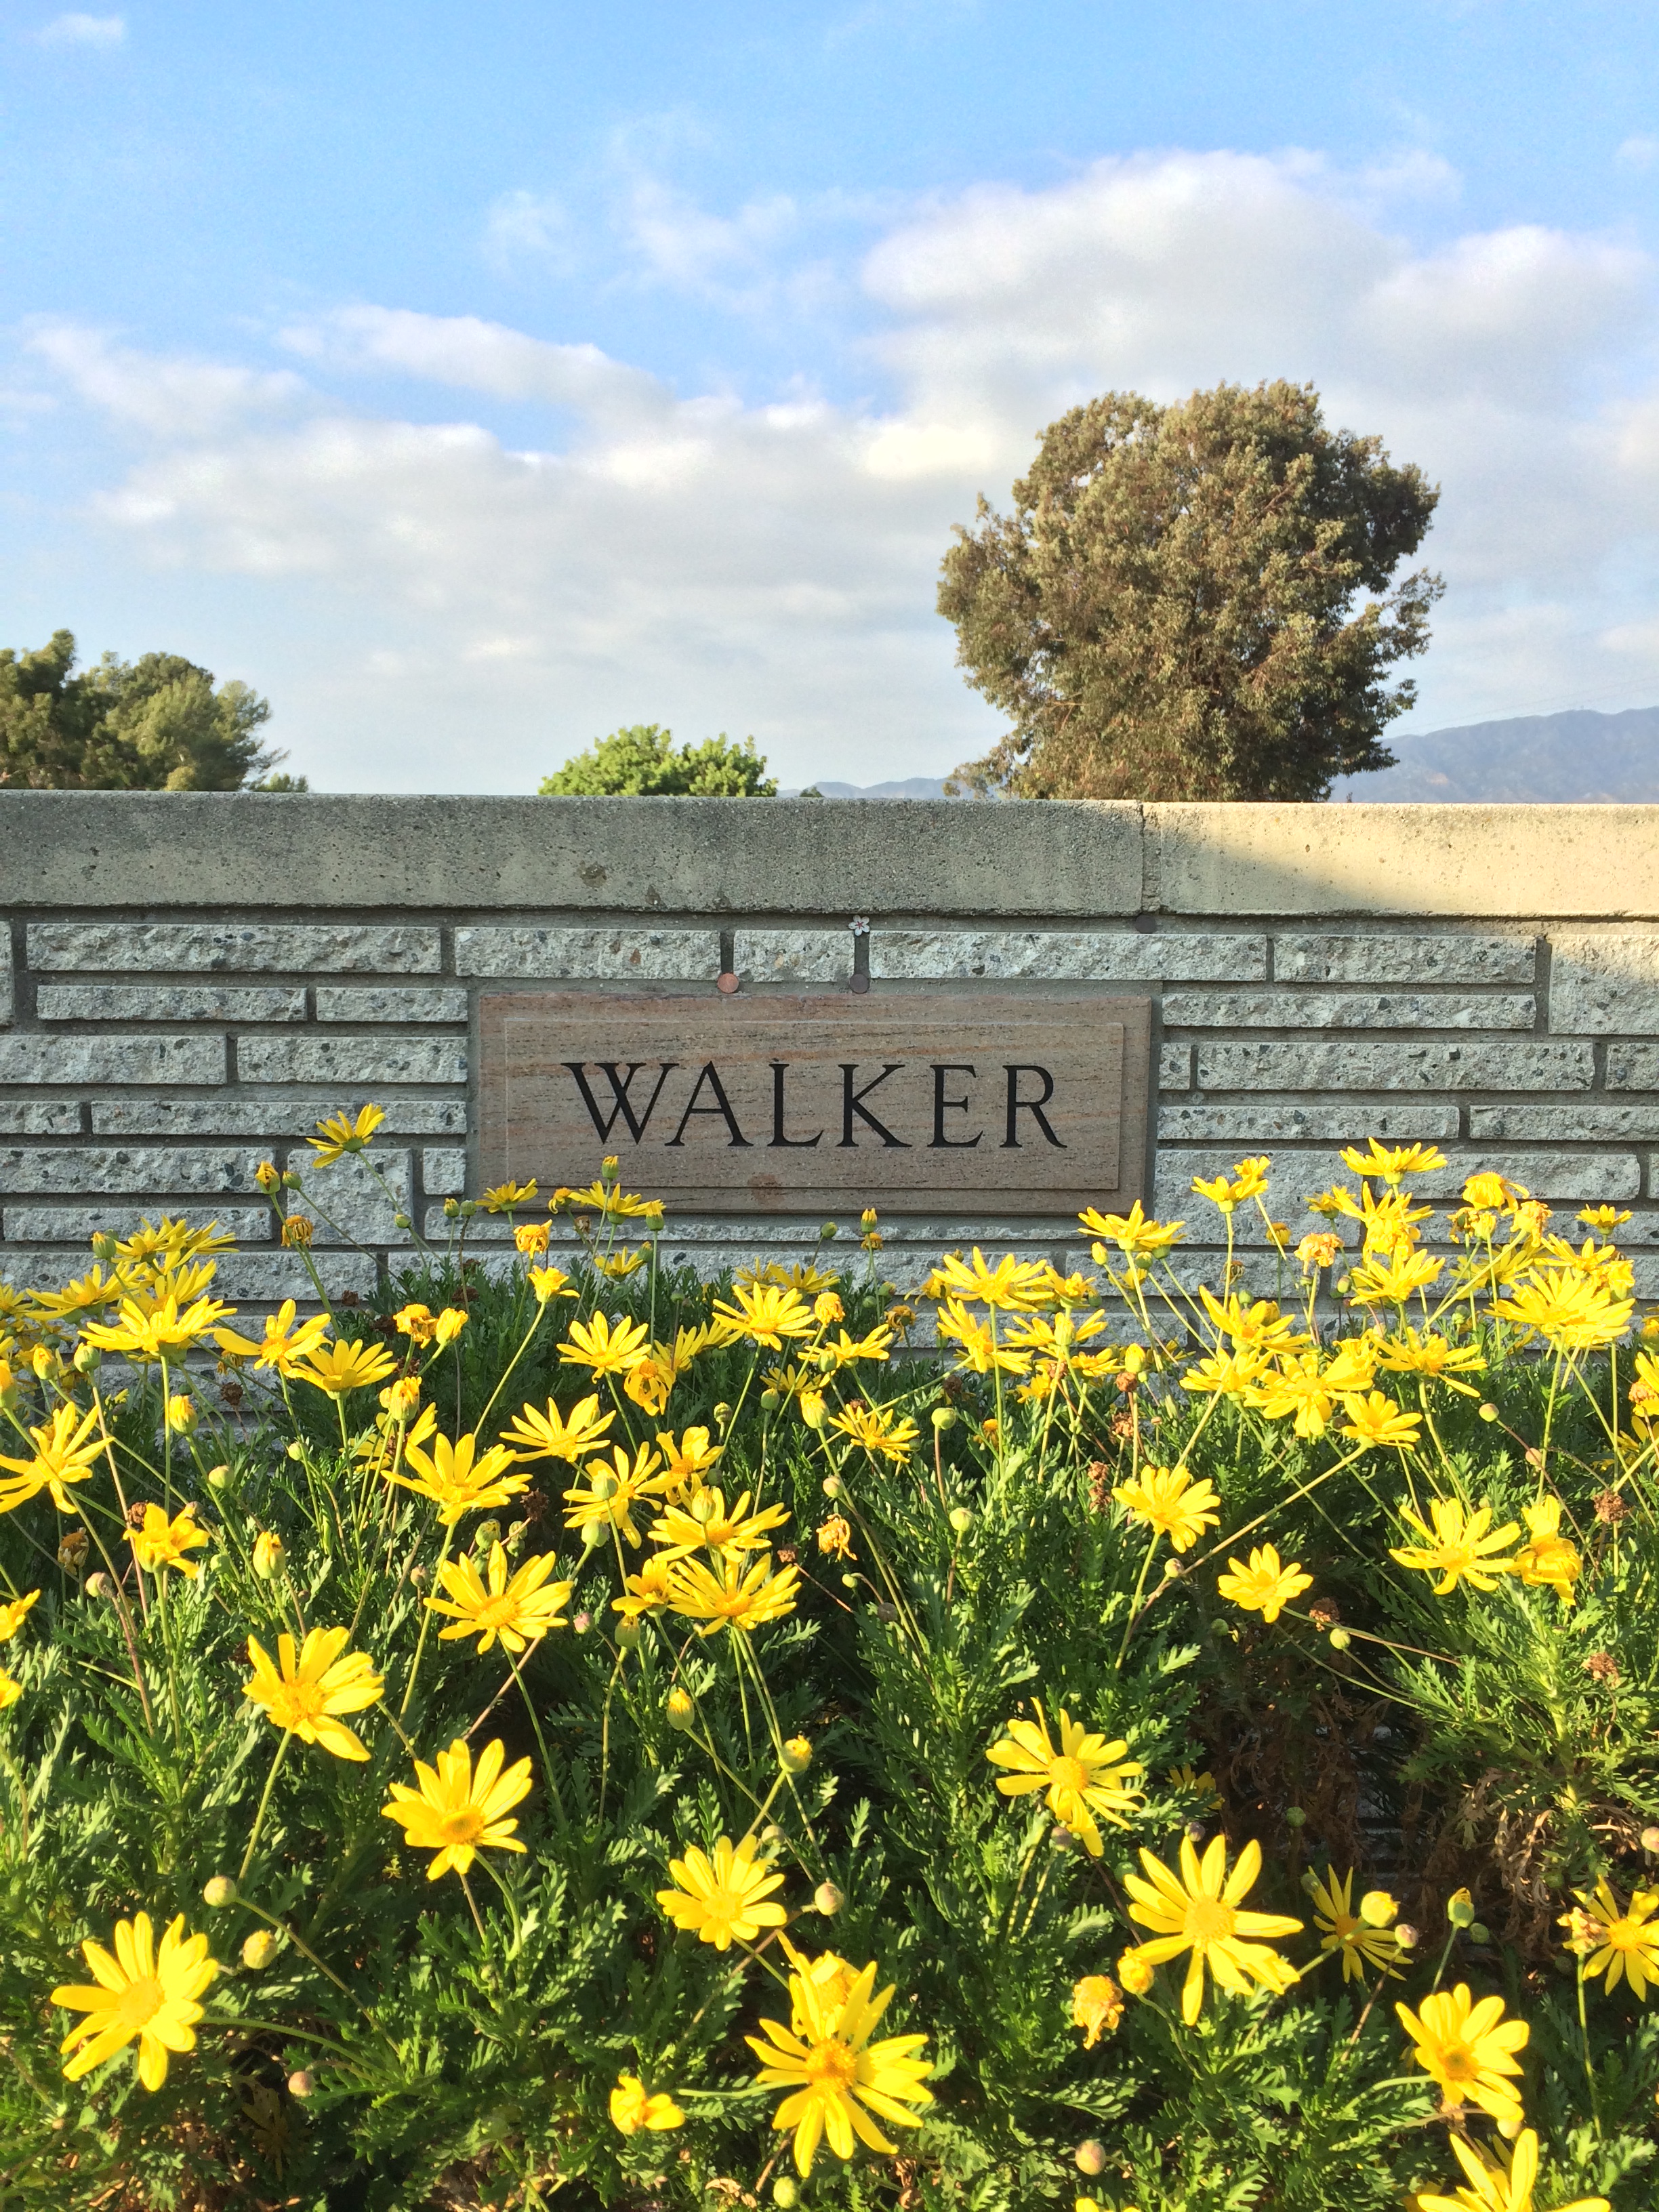 Wikipedia, Forest Lawn Memorial Park (Hollywood Hills), Paul Walker, Self-published work